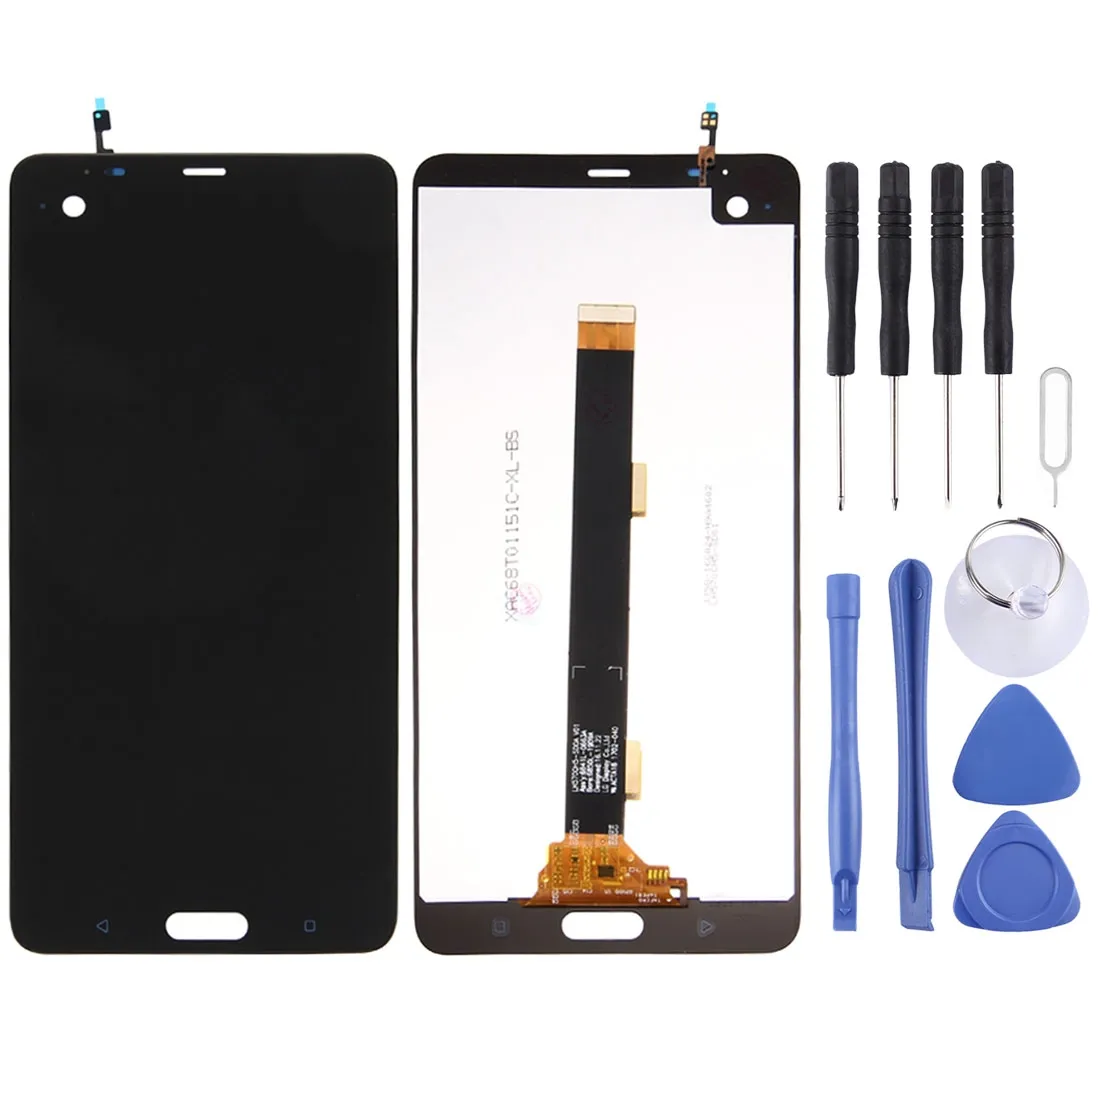 Dropshipping Lcd Screens Replacement Mobile Phone Lcd Display for HTC U Ultra Mobile Lcd Display